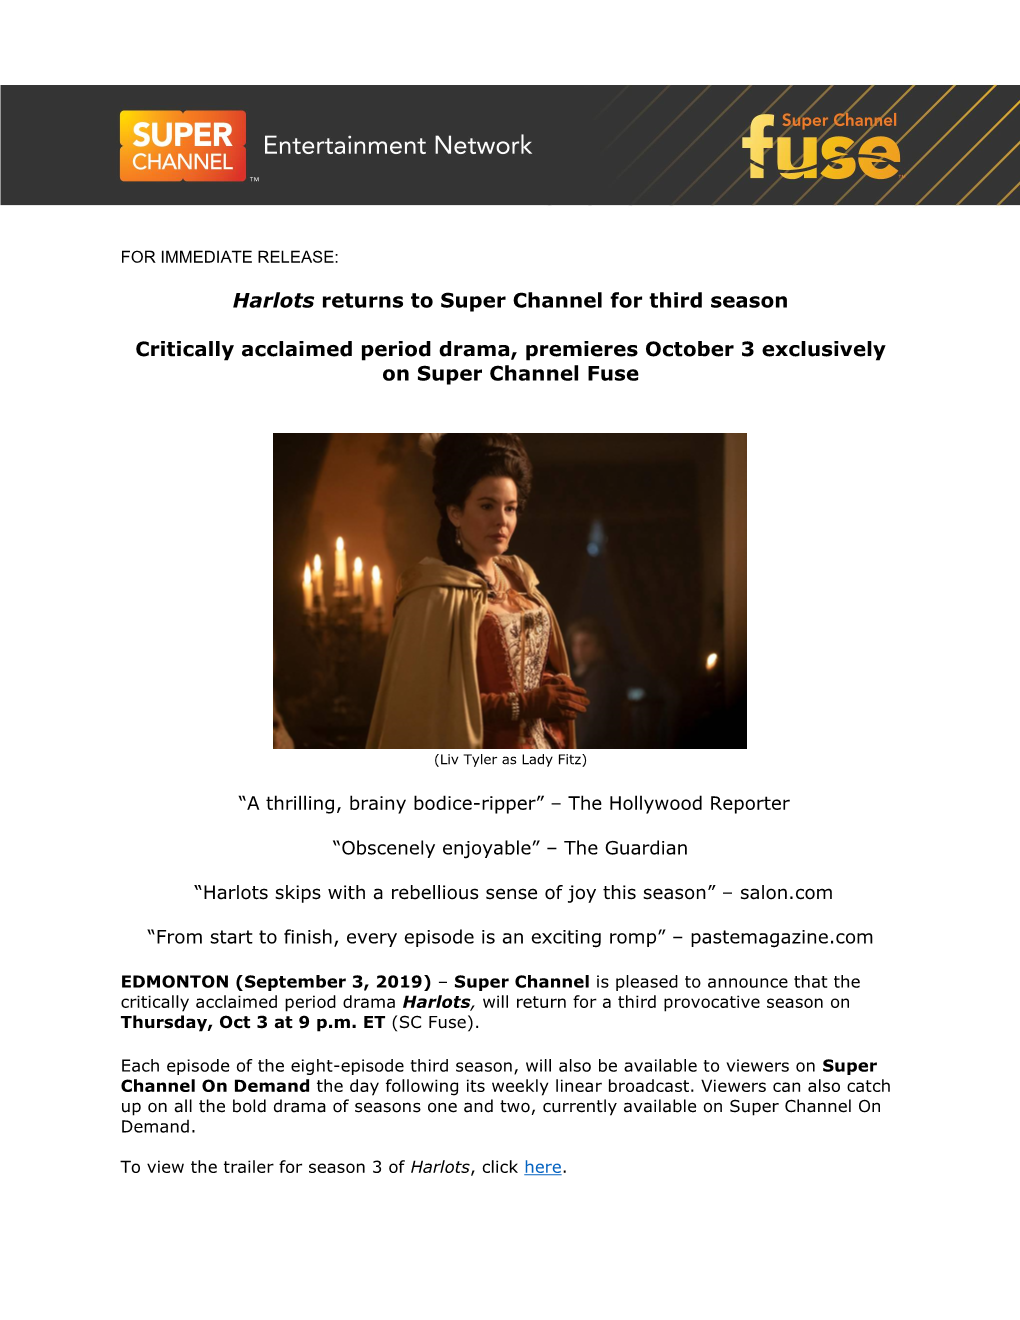 Harlots Returns to Super Channel for Third Season Critically Acclaimed Period Drama, Premieres October 3 Exclusively on Super Ch